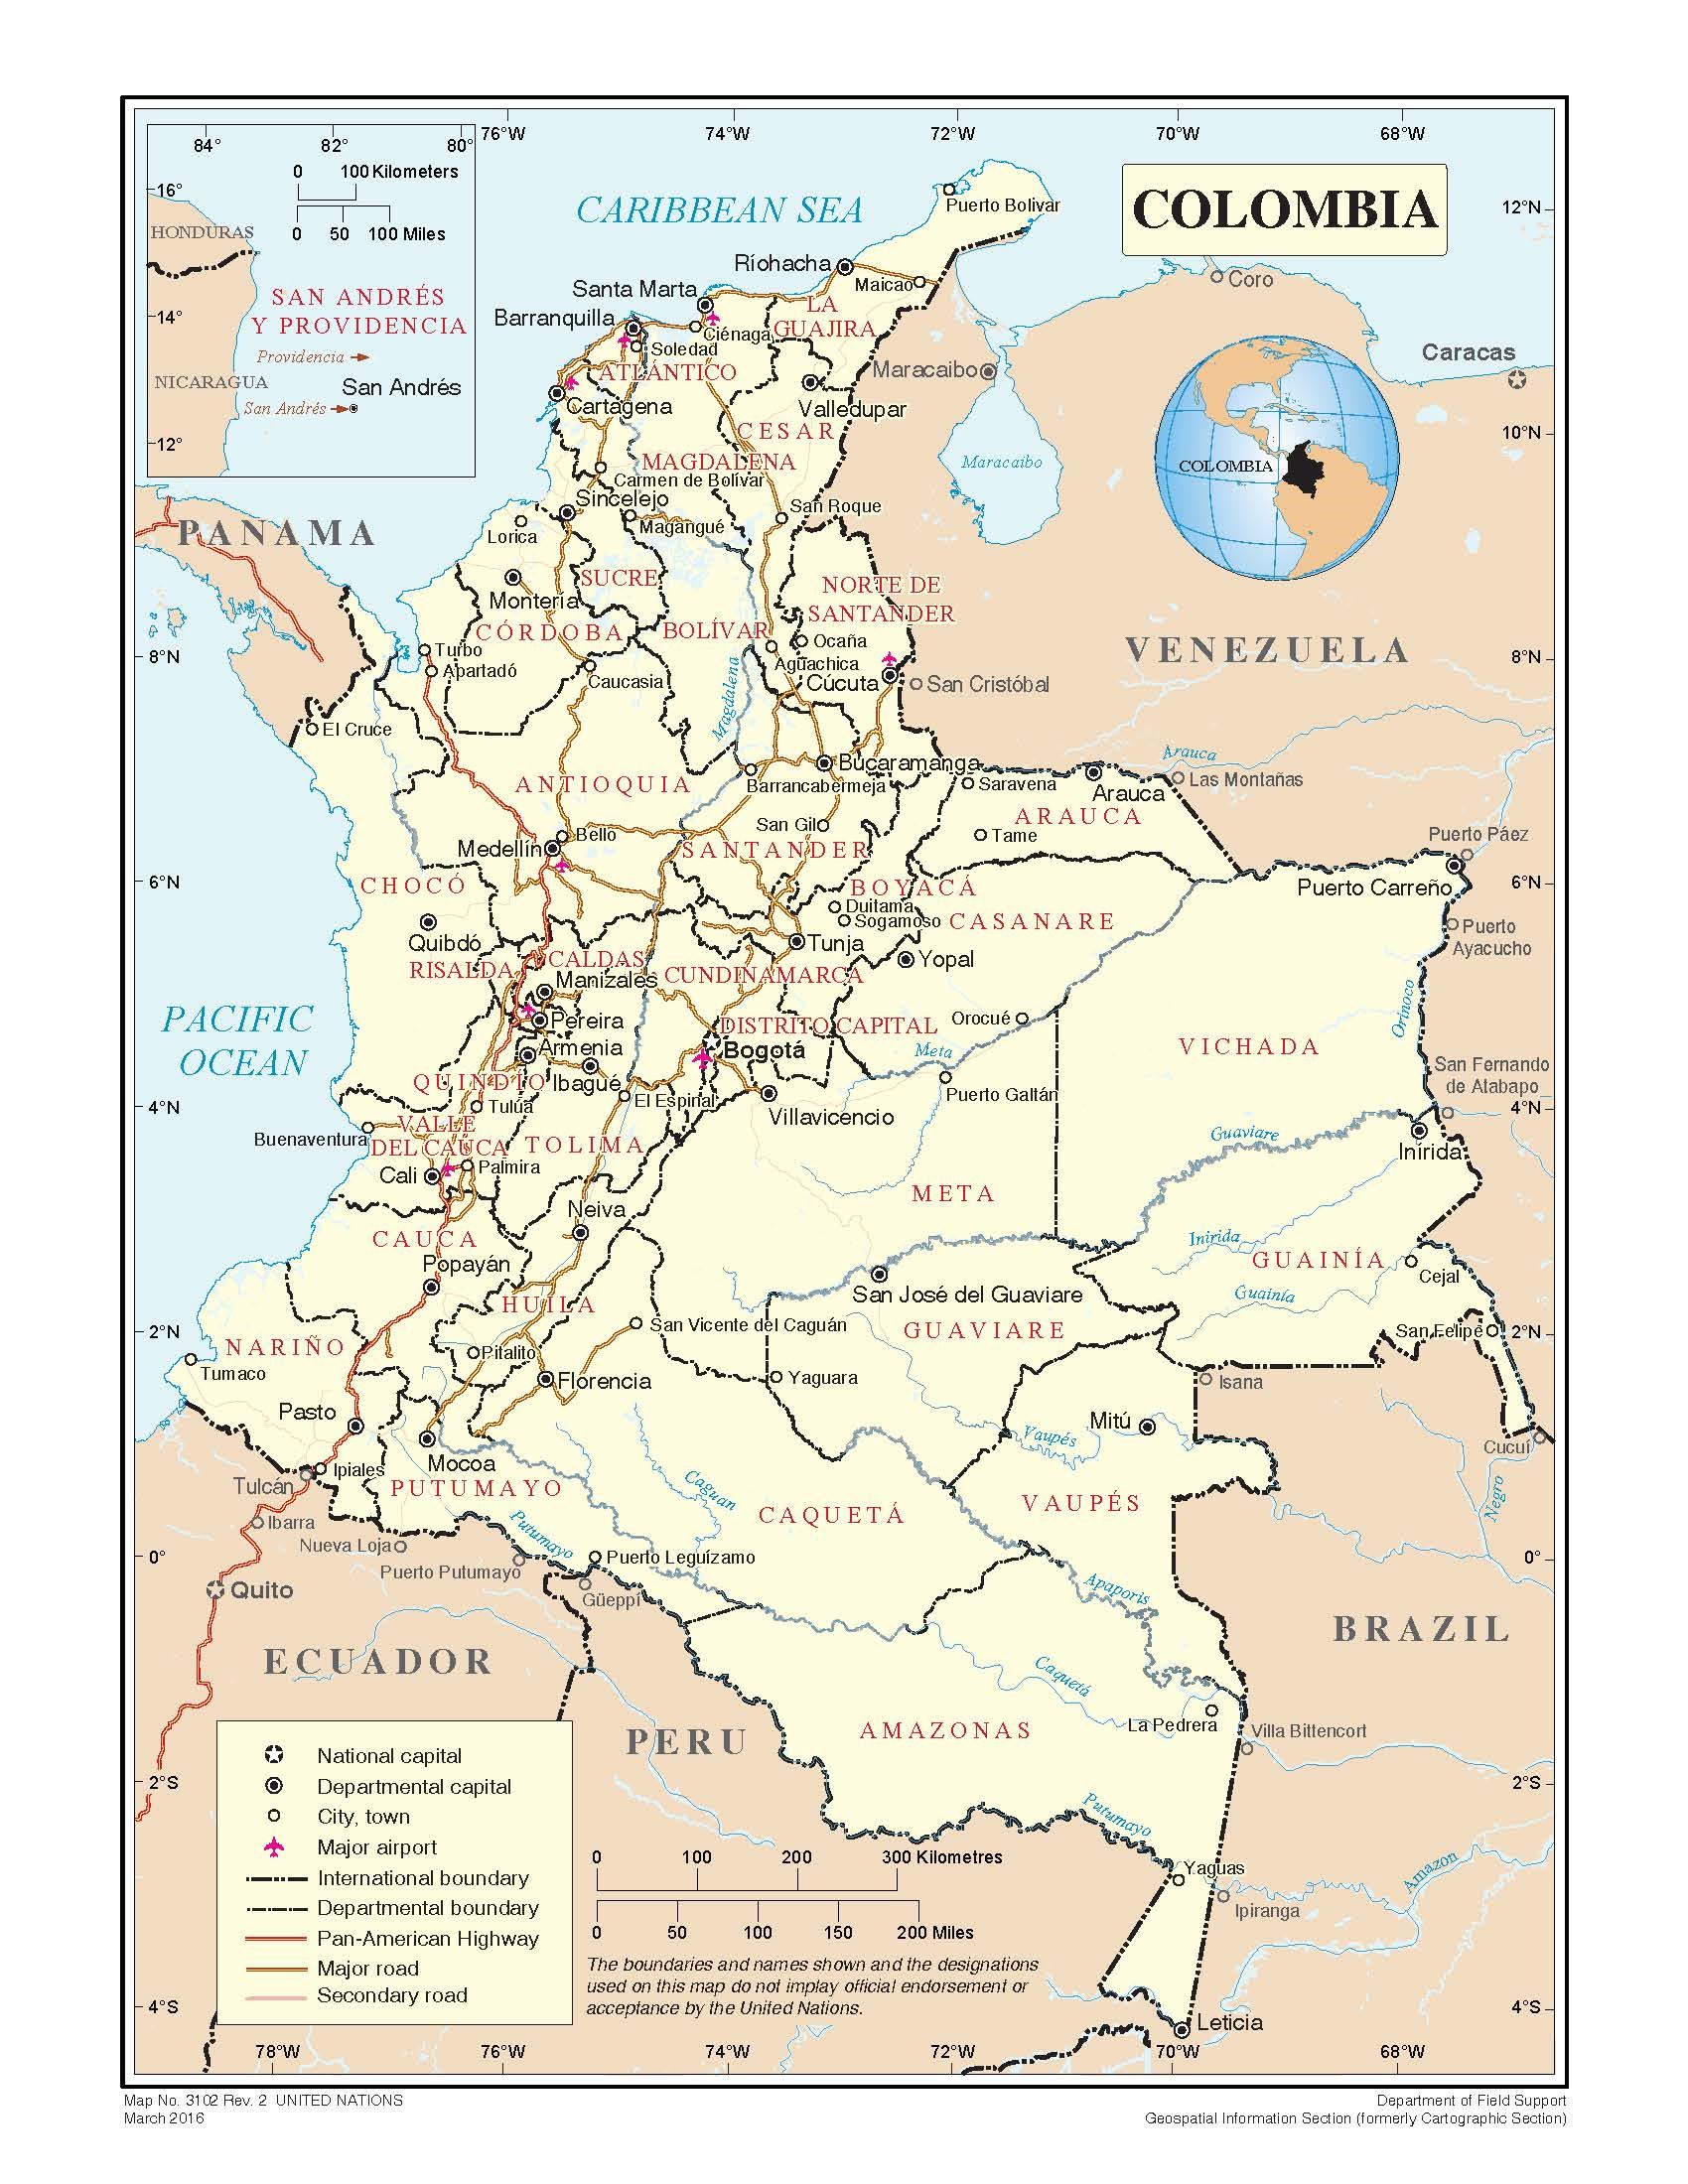 The image is a geographical map of Colombia.